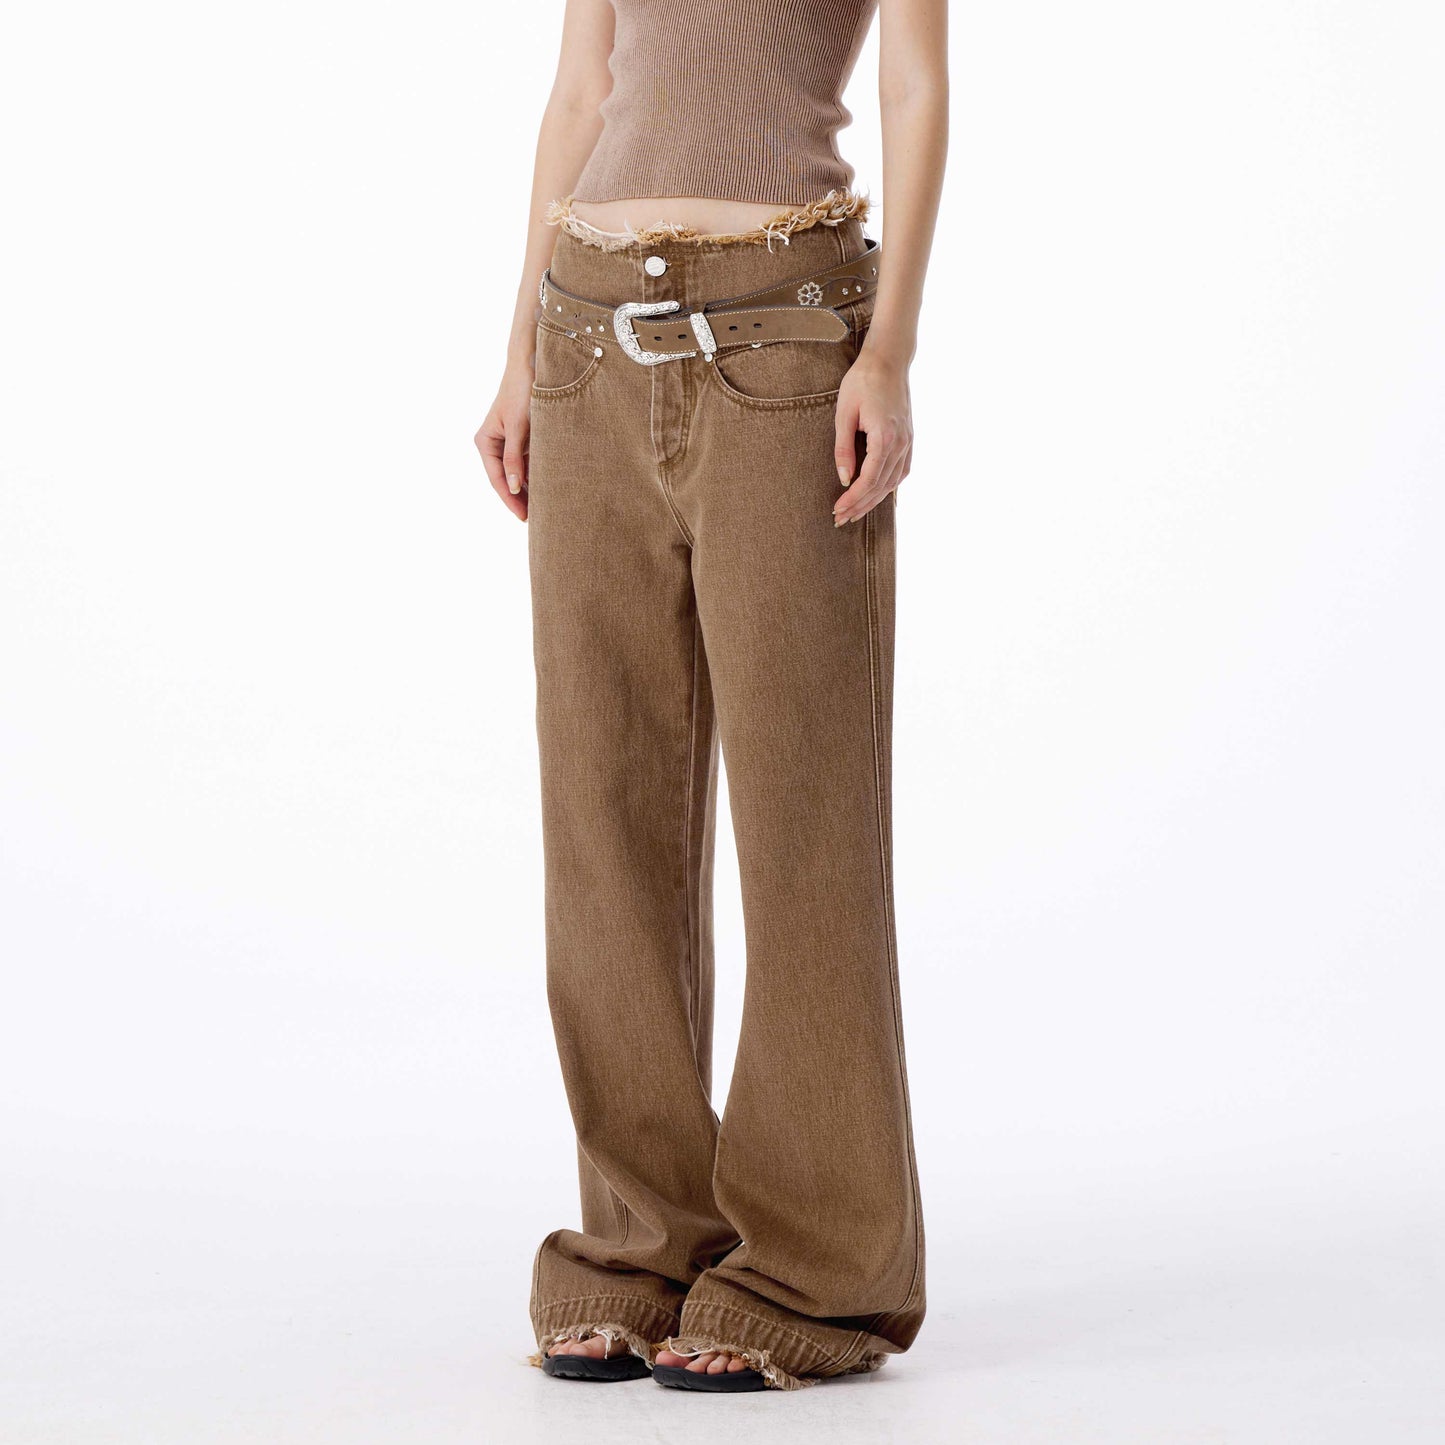 NUTH ‘Unisex’ Brown Pleats Jeans